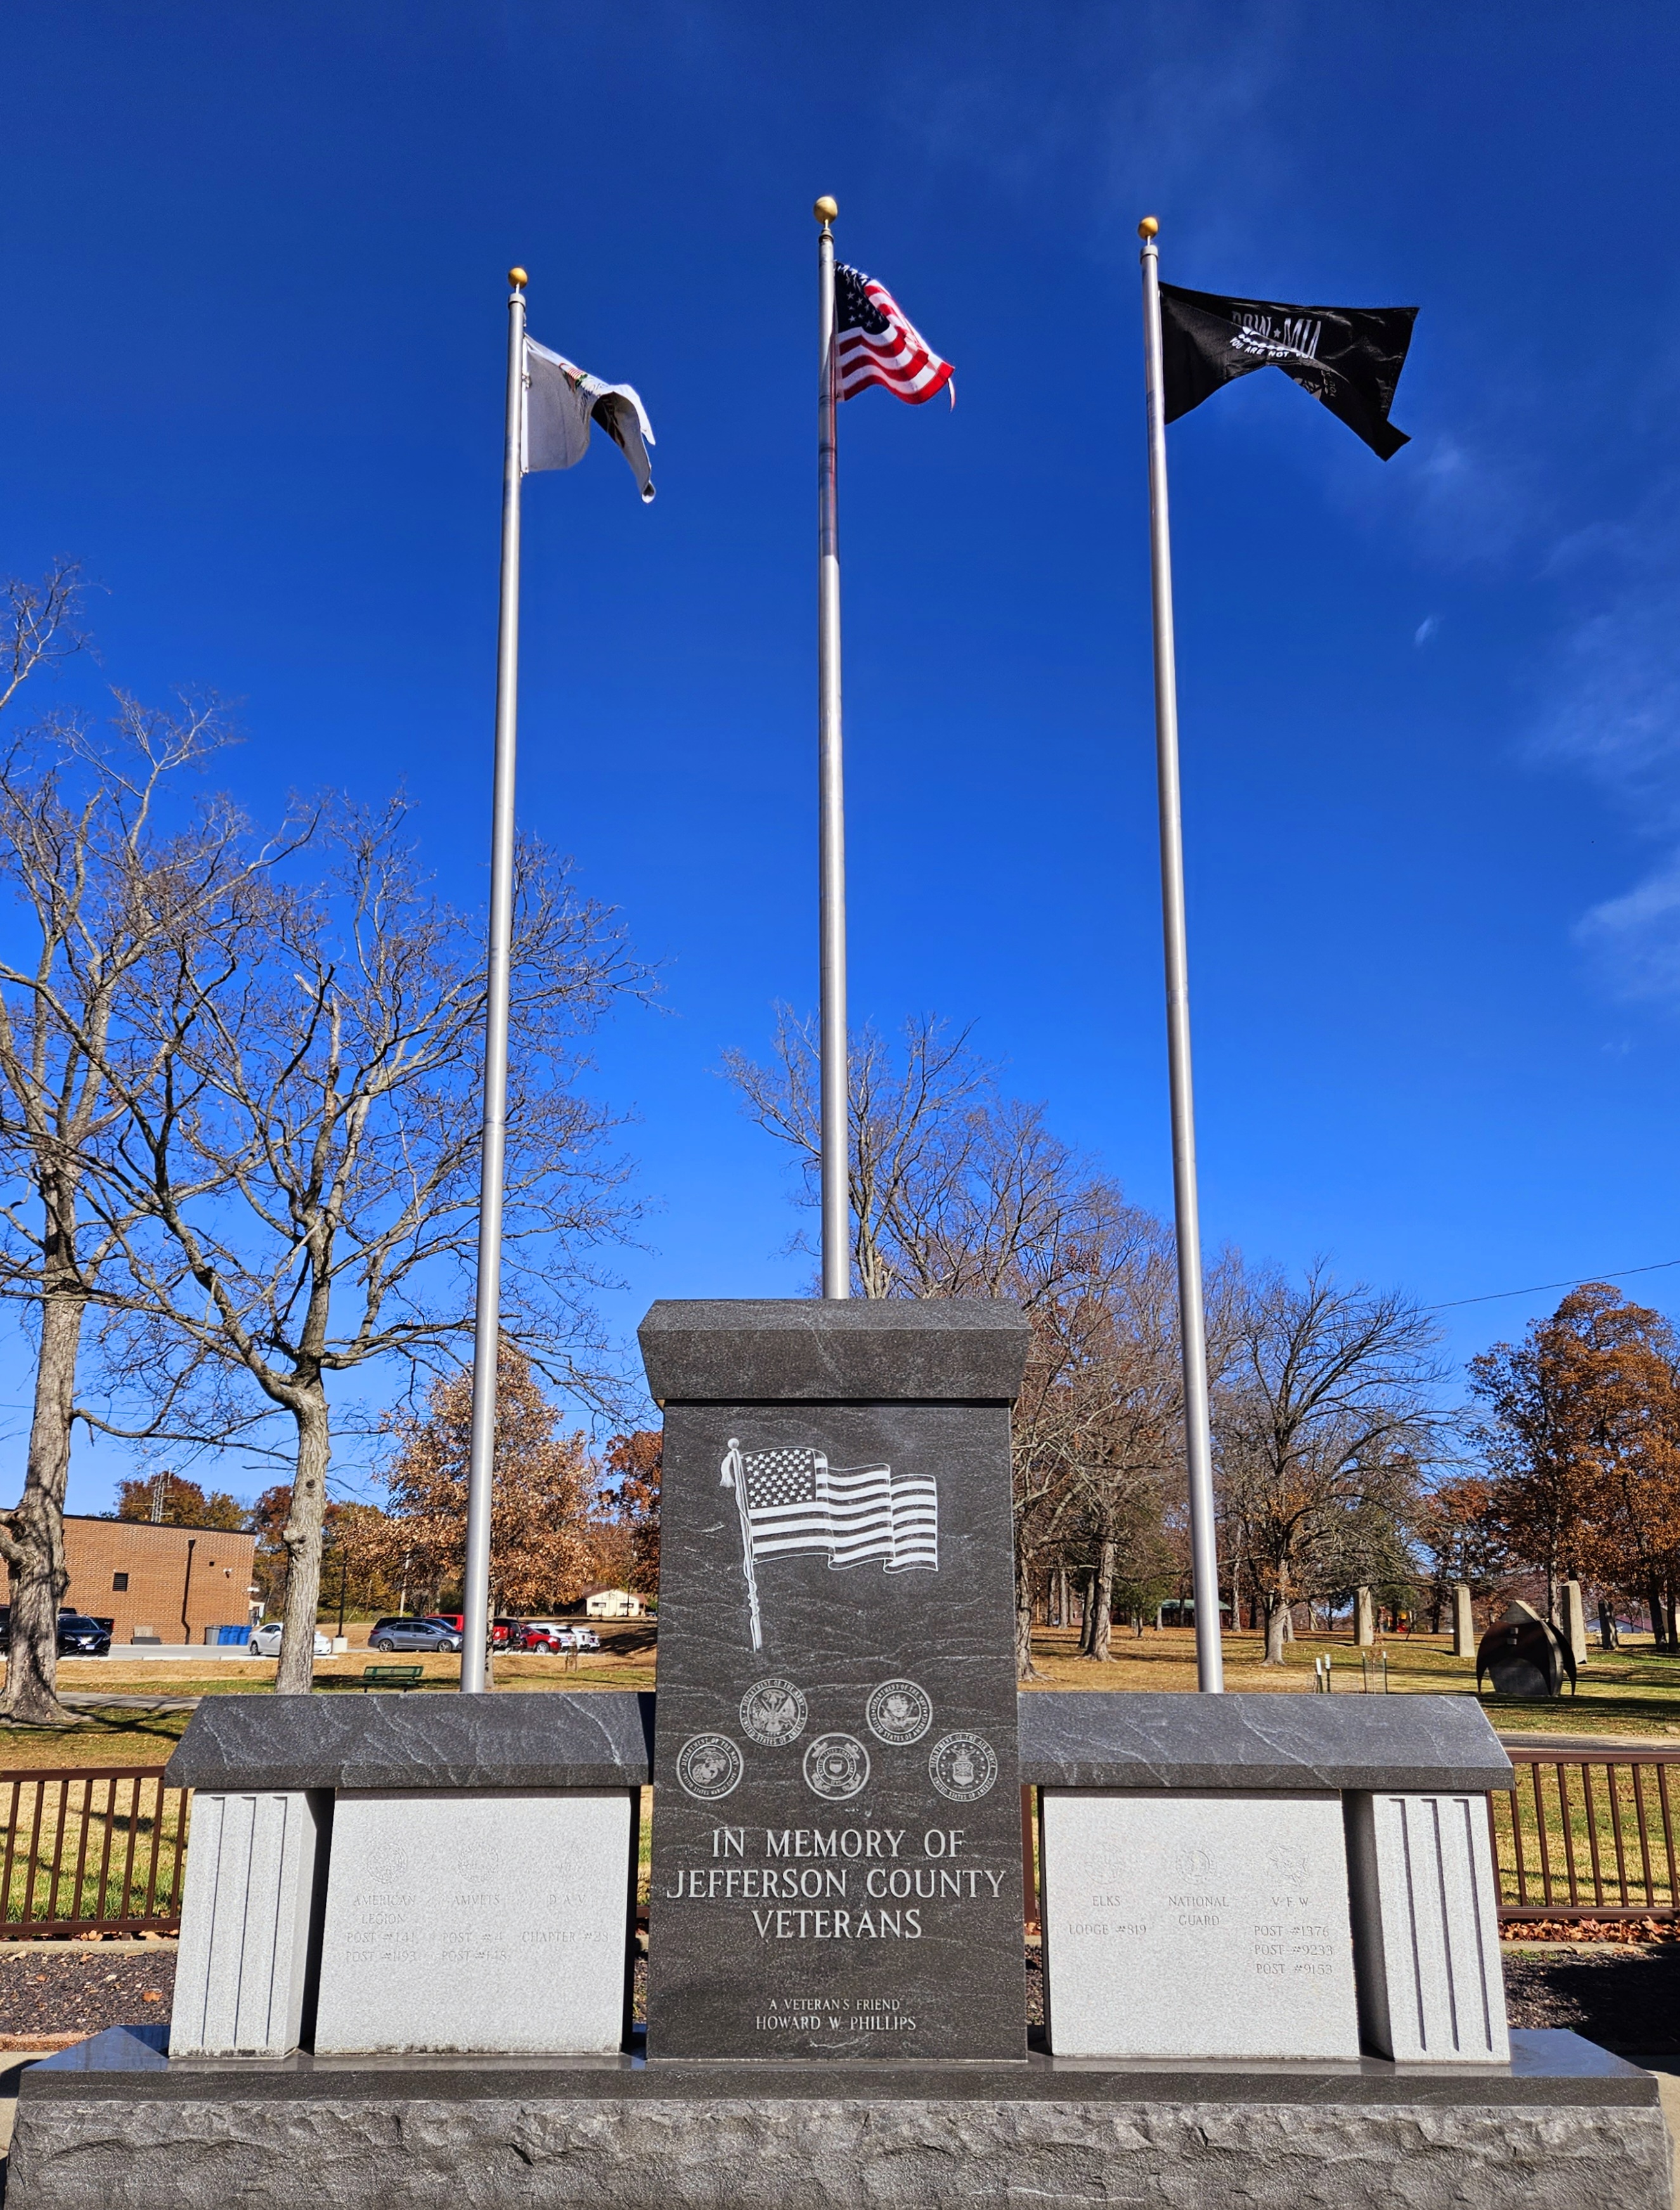 Veterans stone monument with flags